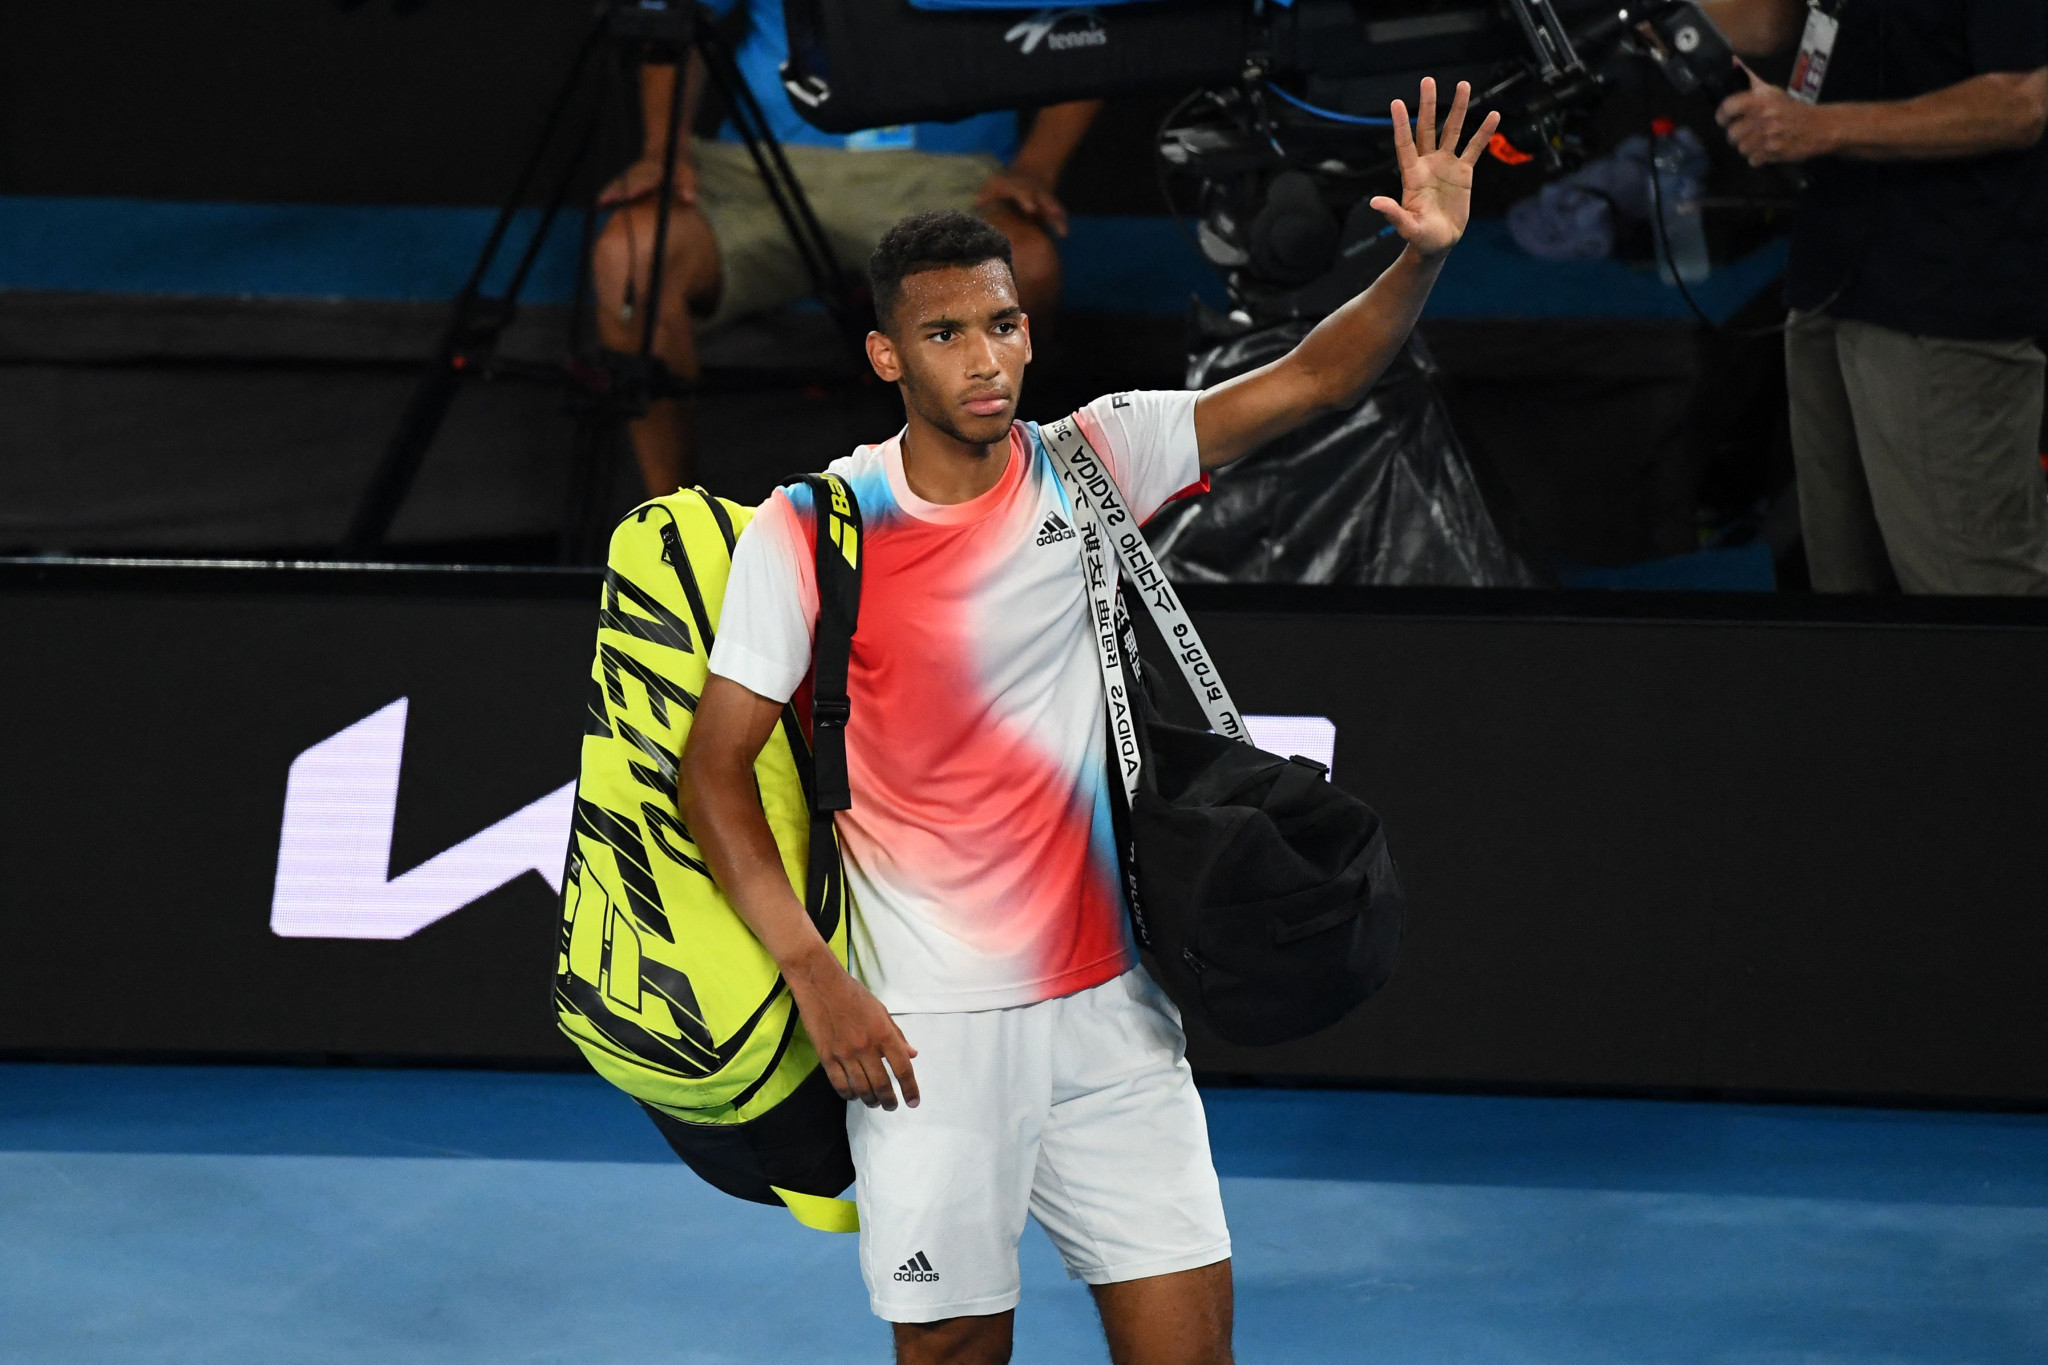 Canada's Félix Auger-Aliassime said he will leave the Australian Open with his head held high following his quarter-final exit ©Getty Images